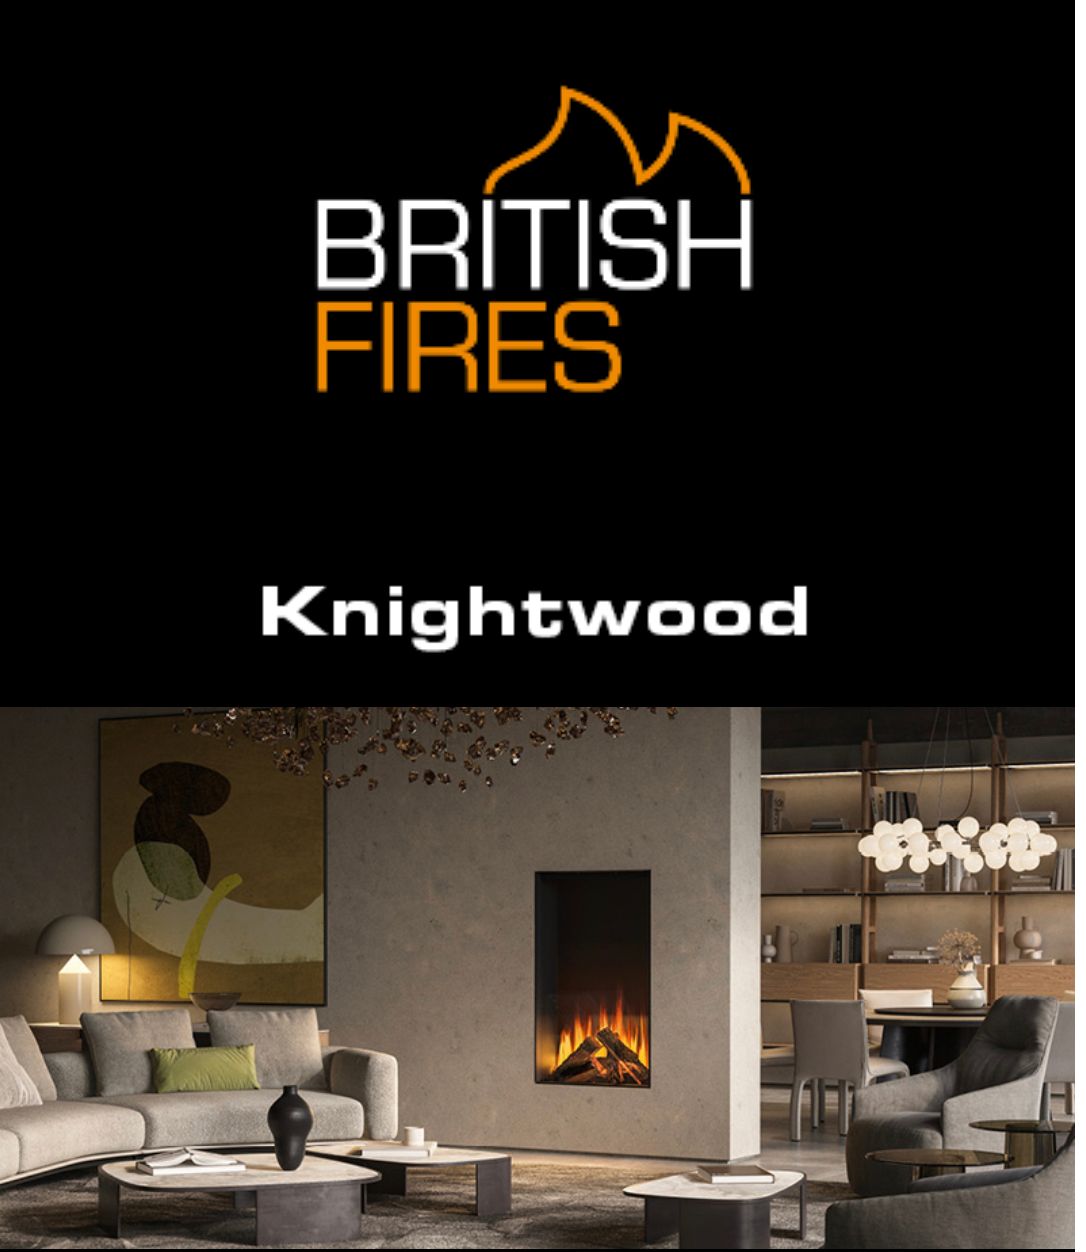 Launch of the KNIGHTWOOD electric fire from British Fires